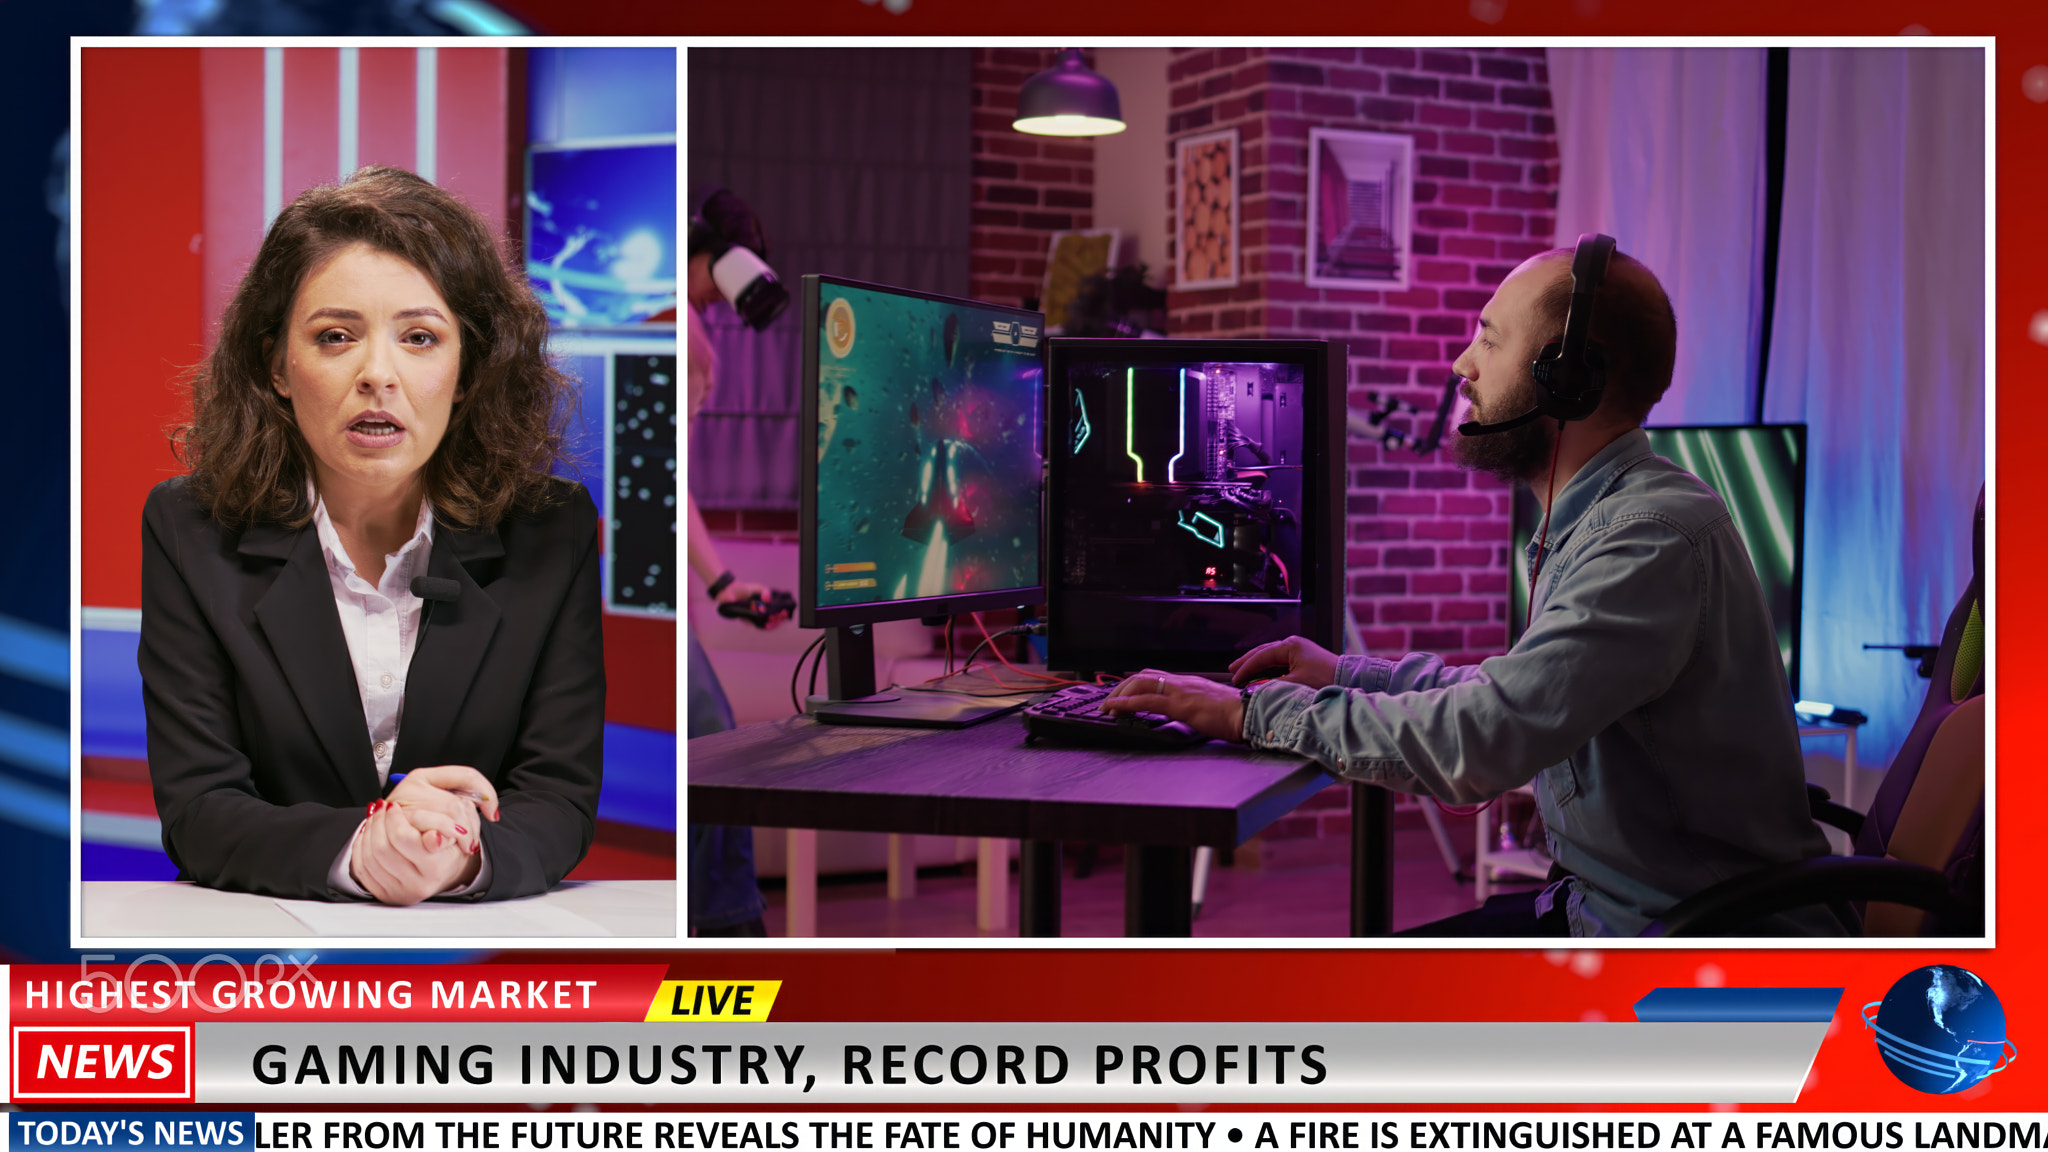 Gaming industry growth newscast